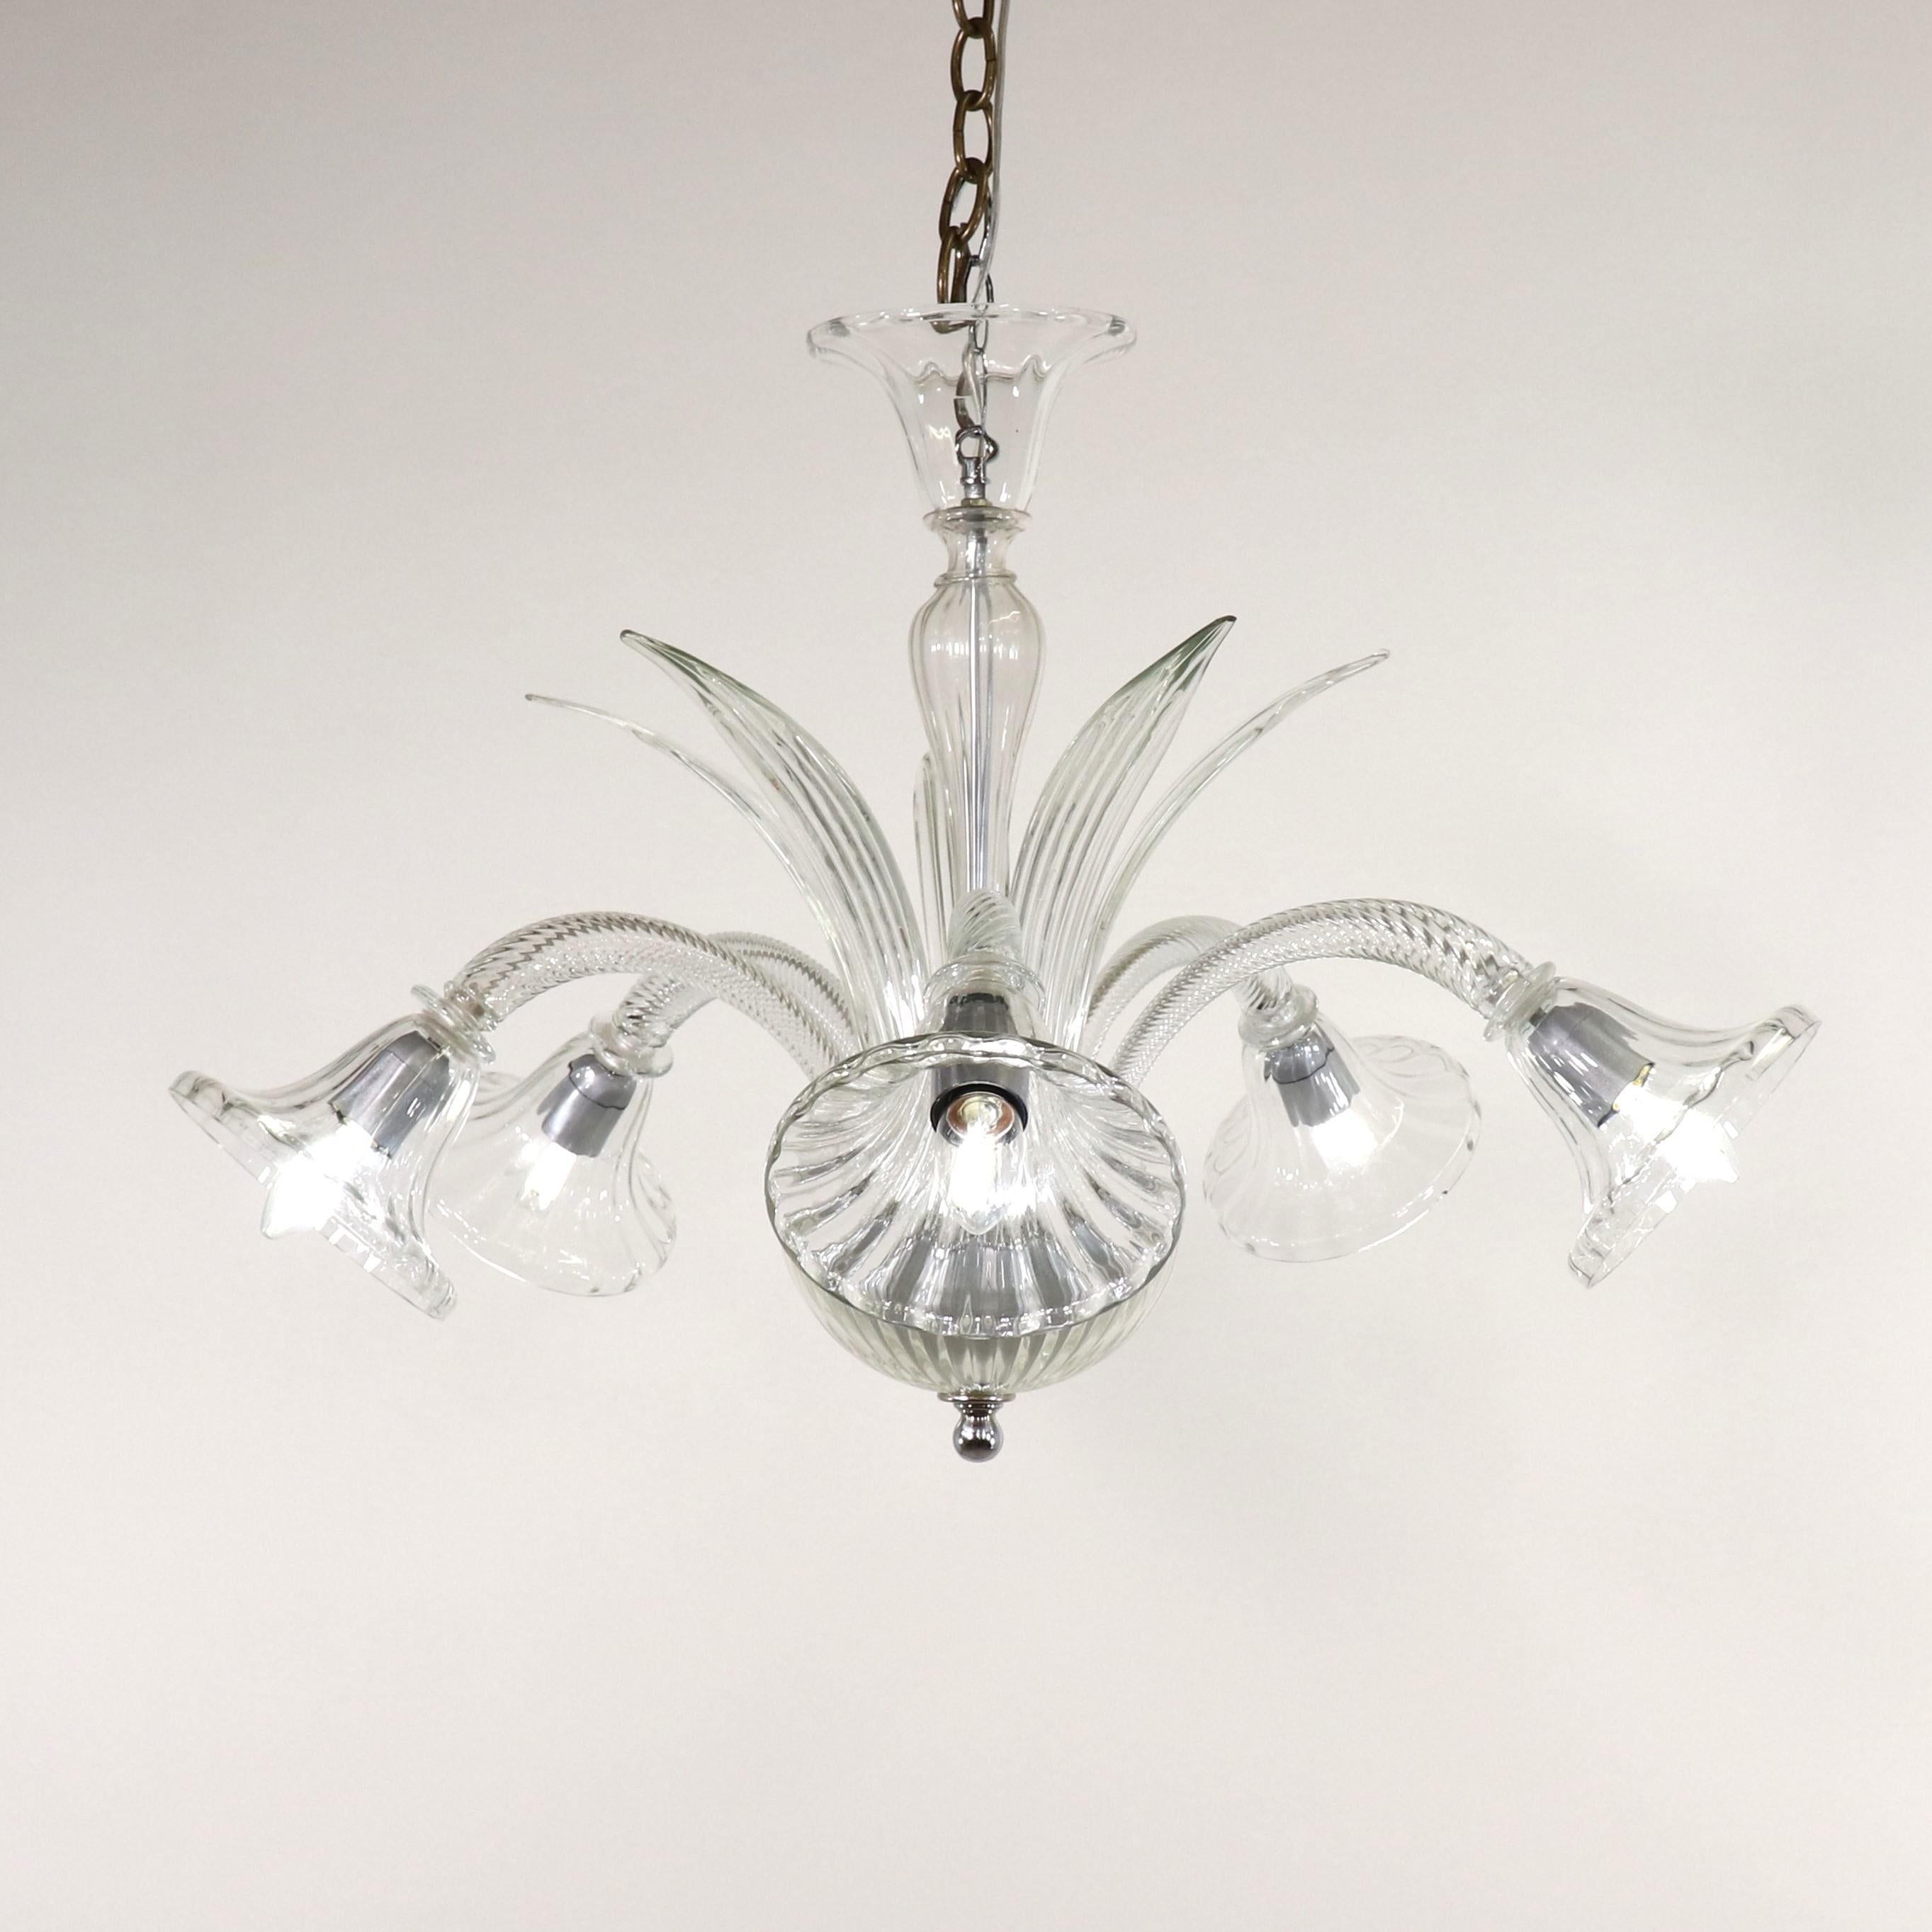 This tasteful mid-century modern Murano chandelier has five scroll arms, a bulbous center column with sprouting leaf details, and scalloped rims. The body and arms of this piece are made of clear, colorless Venetian glass. The glasshouses on the